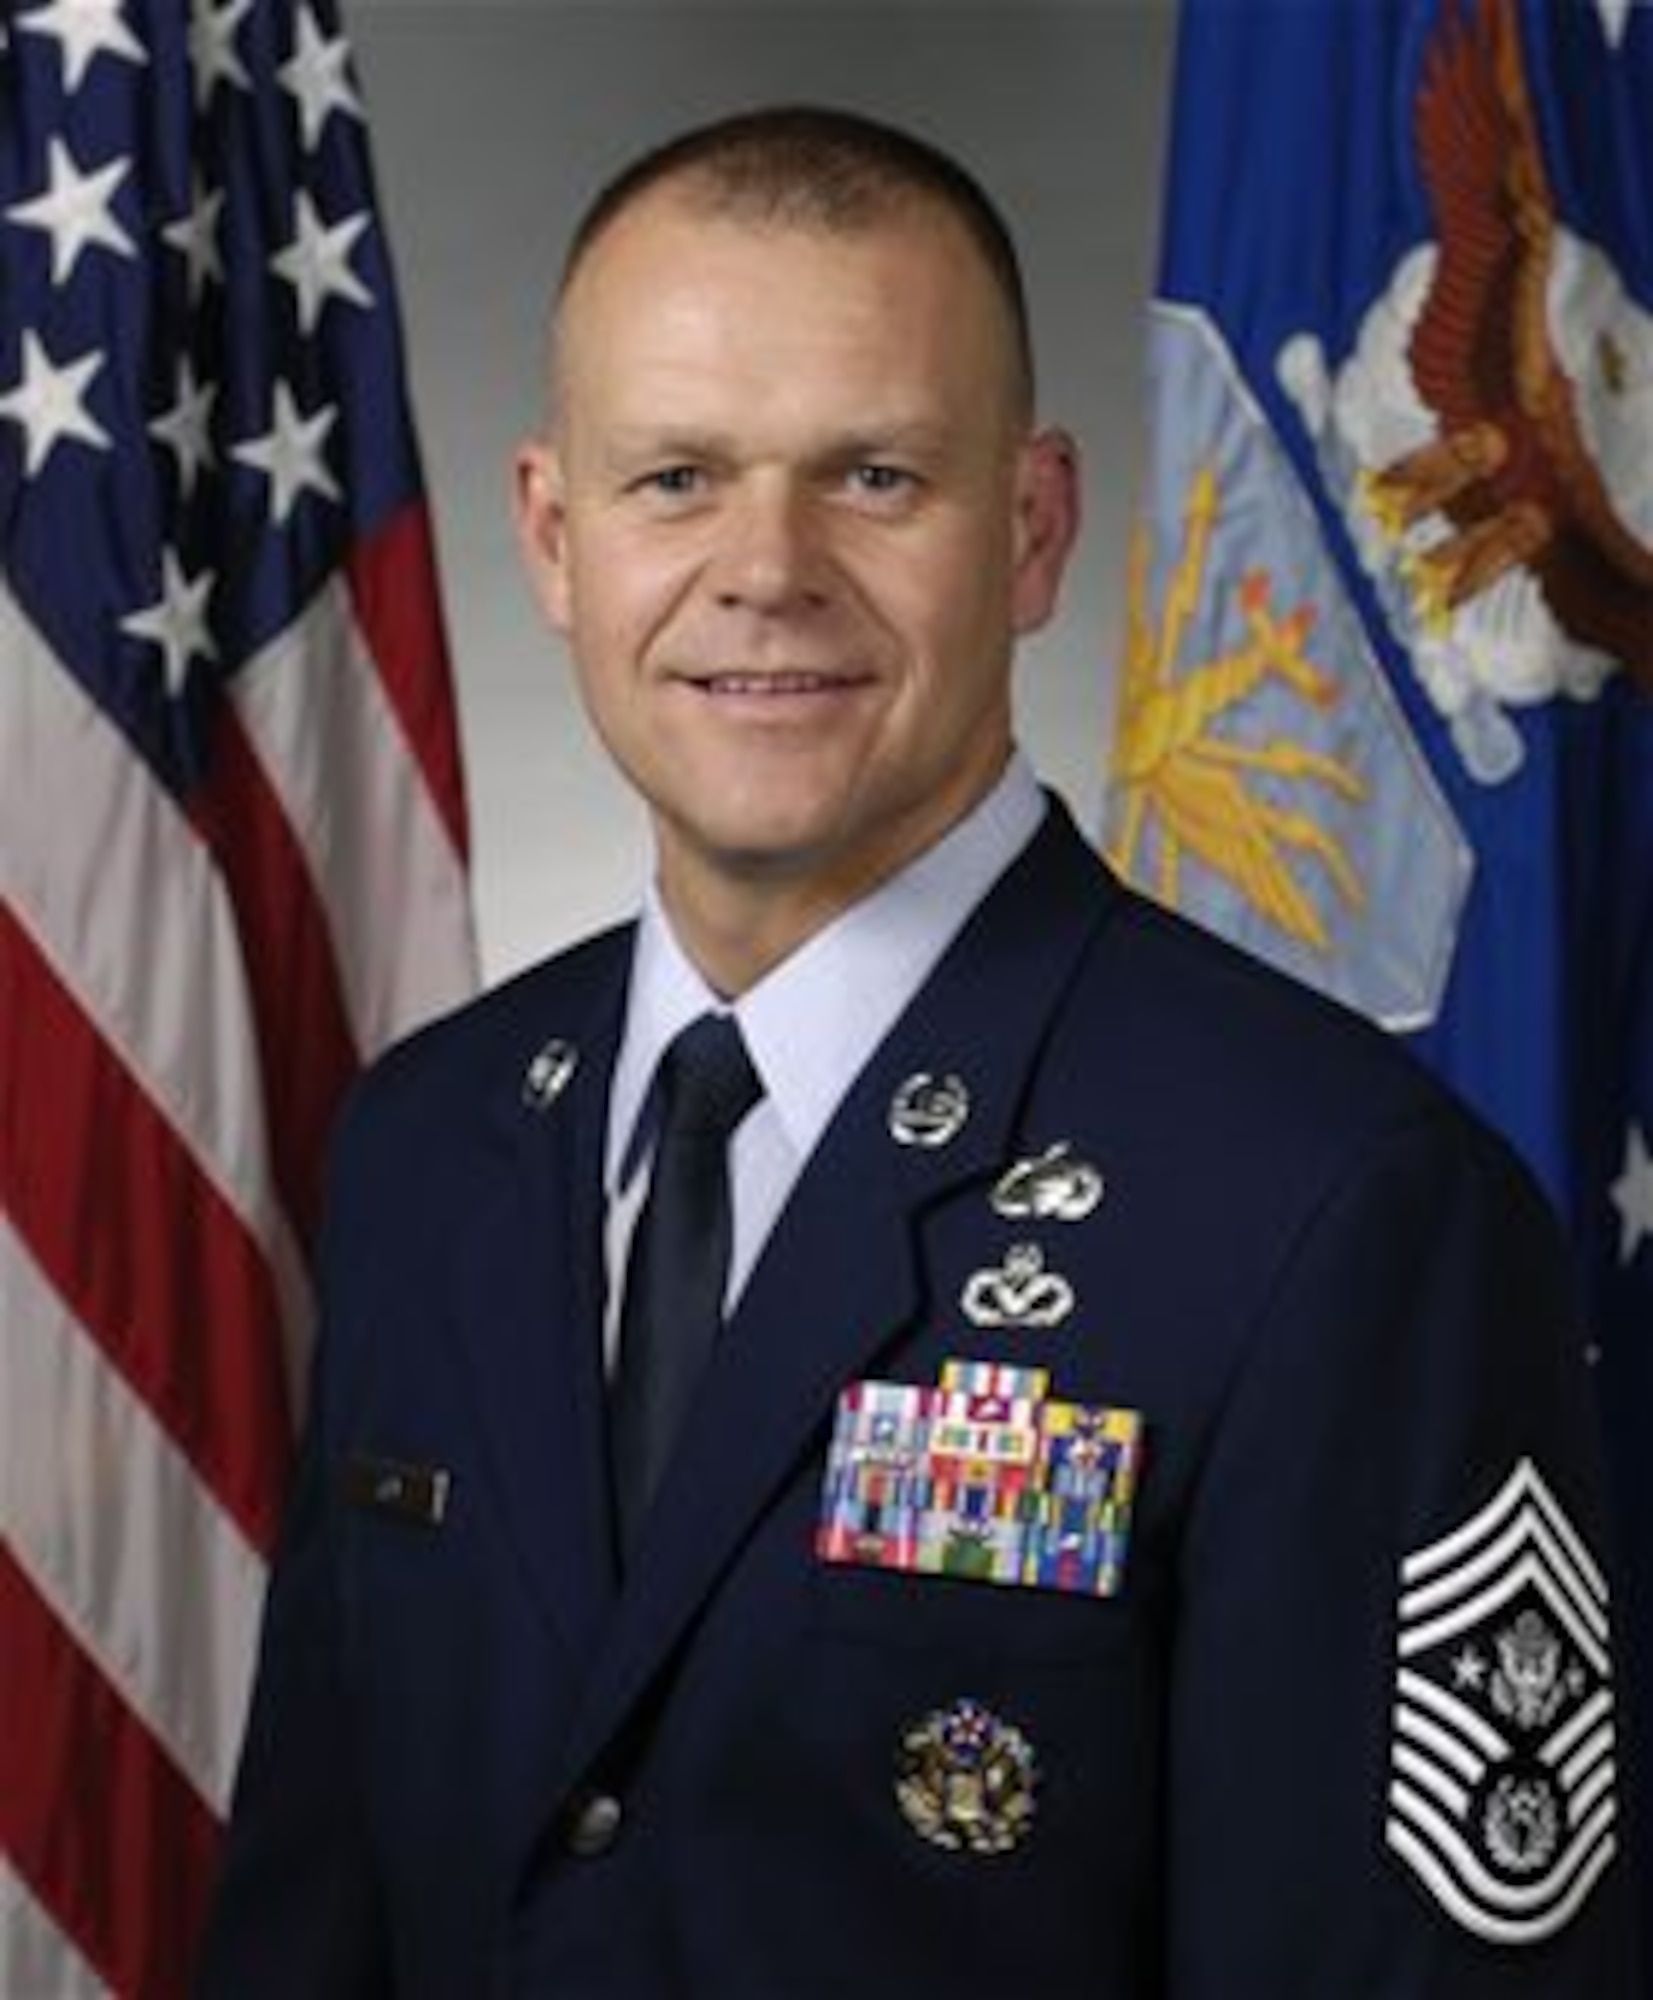 Chief Master Sergeant of the Air Force James
A. Roy is scheduled to be the guest speaker at
the 911th Airlift Wing Annual Awards Banquet,
March 6, 2010. CMSAF Roy is the highest ranking
enlisted member in the United States Air Force.